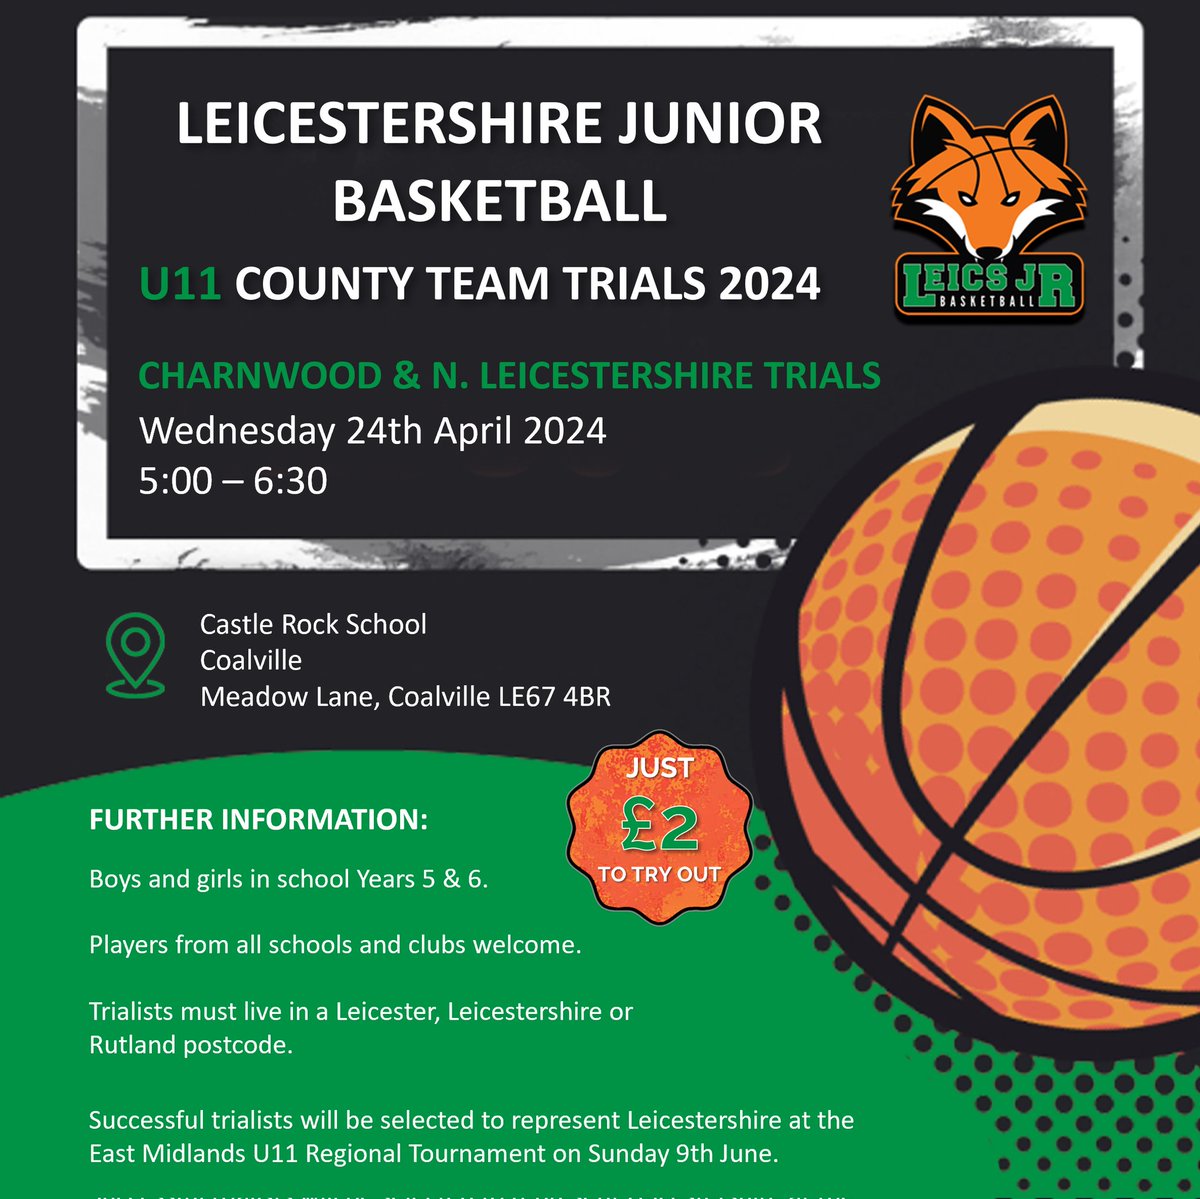 U11 COUNTY TEAM - NORTH LEICESTERSHIRE TRIALS For the first time ever, we're also hosting trials outside of Leicester! Basketballers from North Leicestershire and Charnwood can now sign up for our trials at Castle Rock School in Coalville. Sign up now using the link in our bio